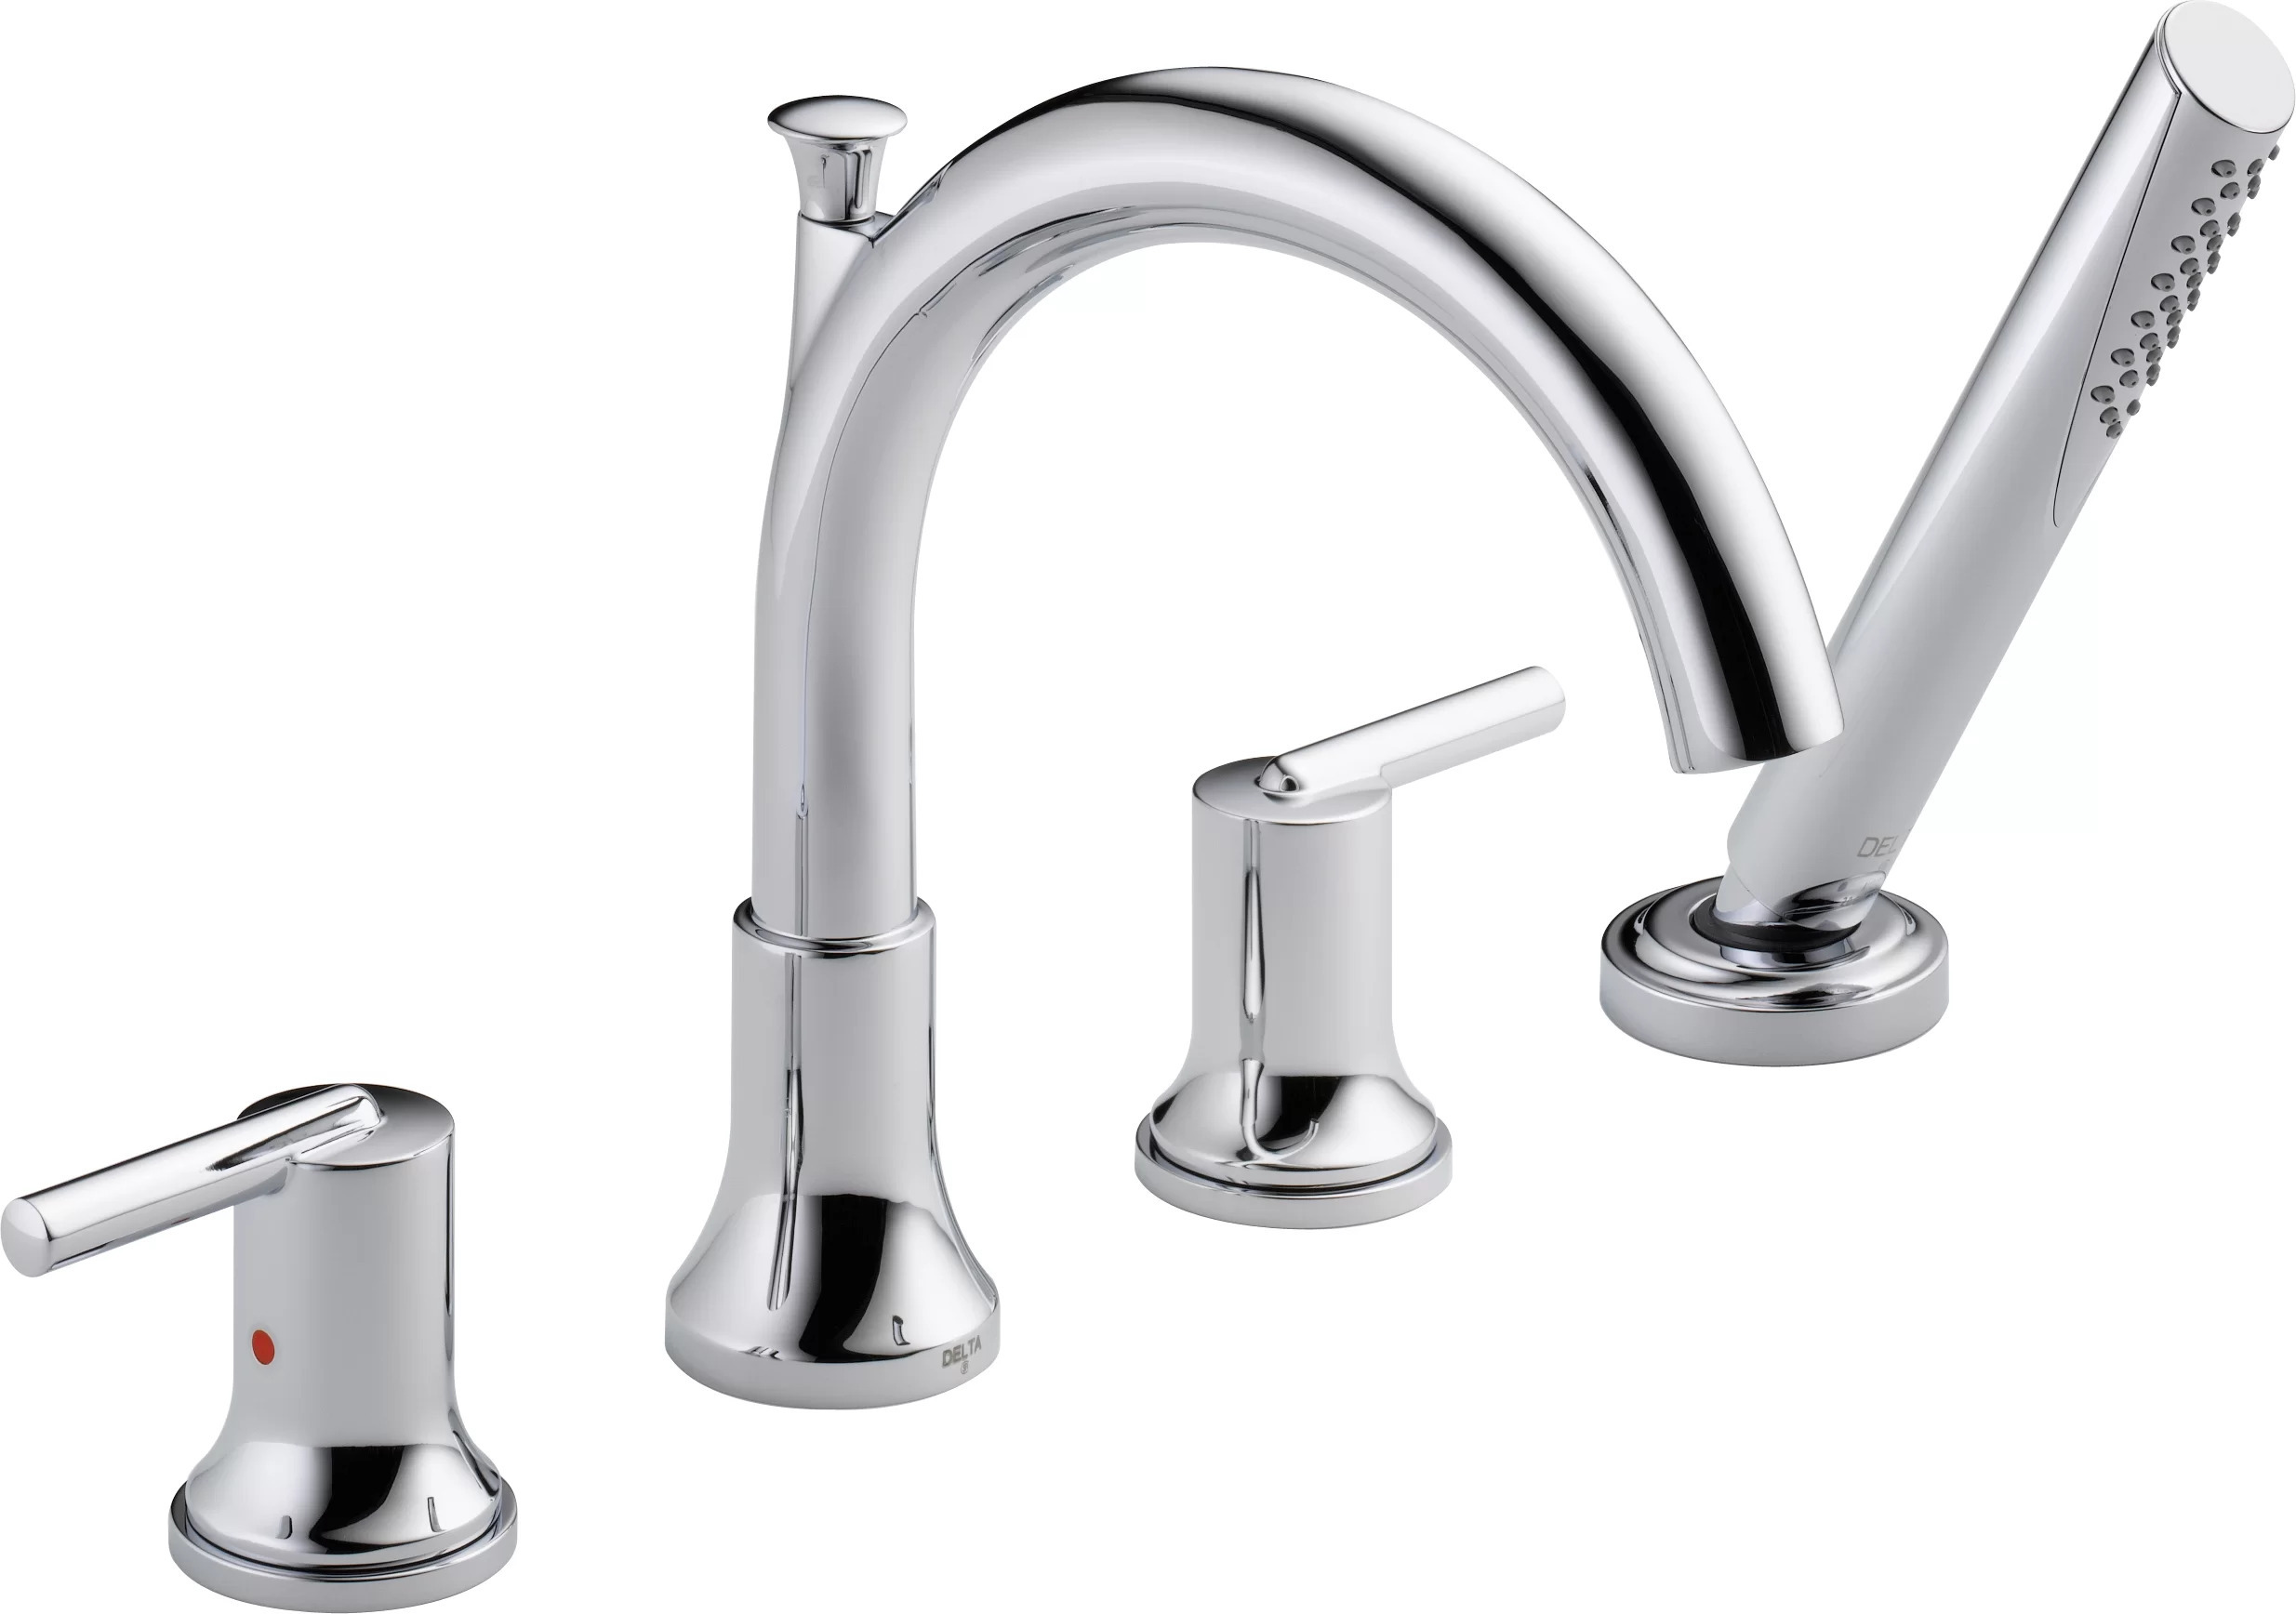 12 Best Roman Tub Faucet With Hand Shower for 2023